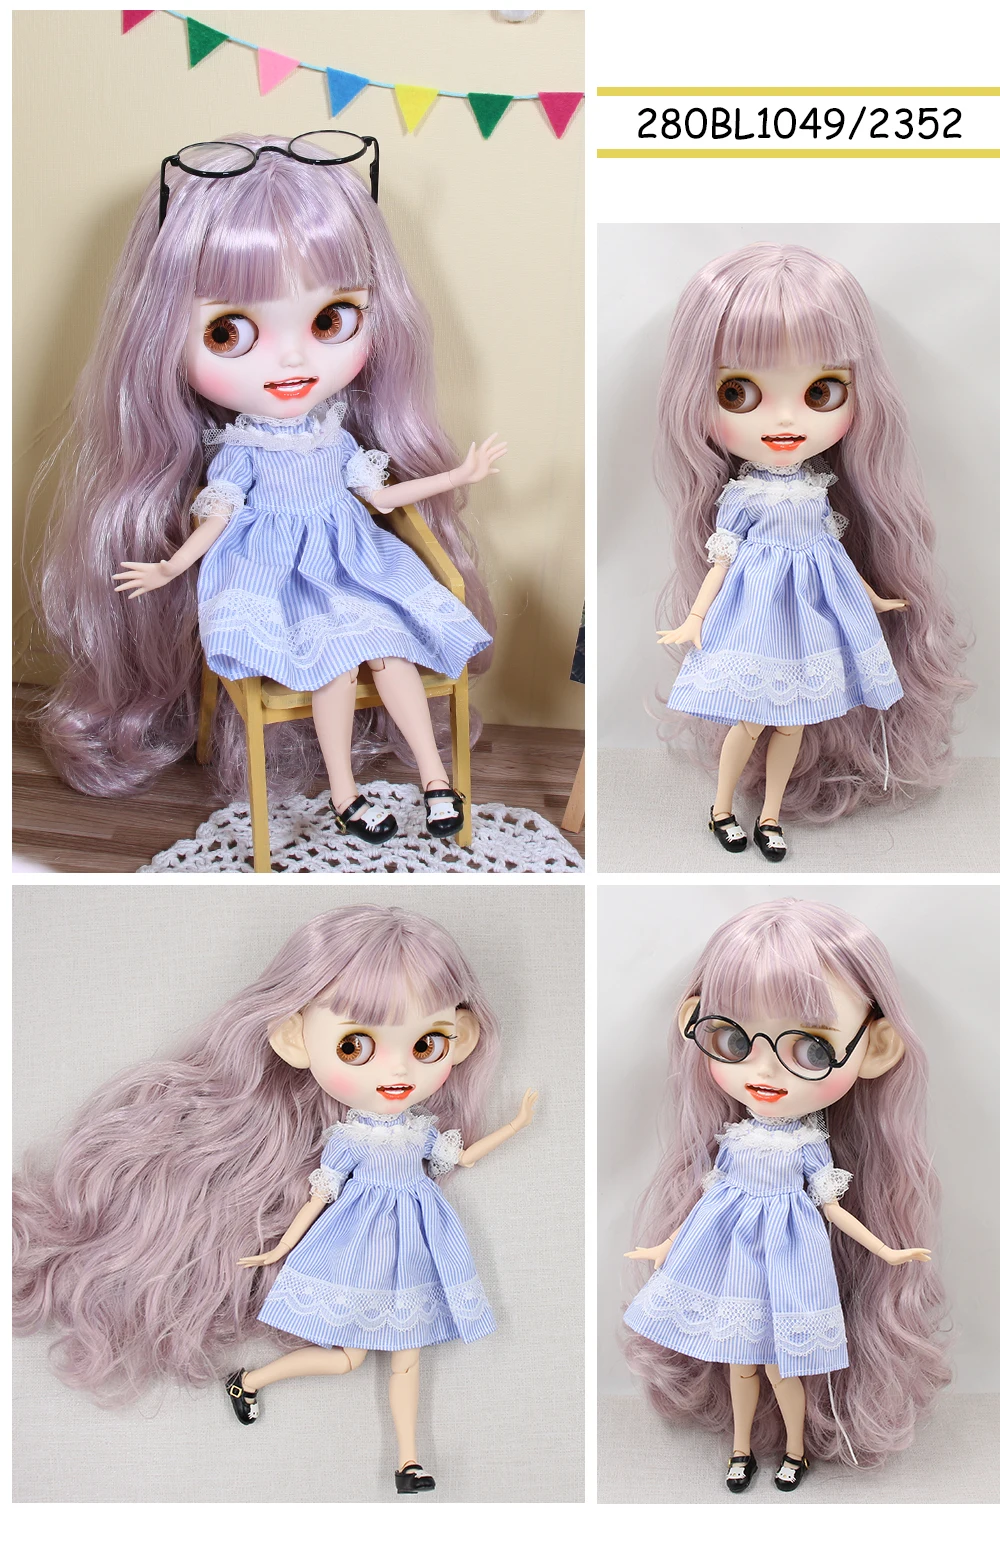 Vanessa – Premium Custom Blythe Doll with Smiling Face 1